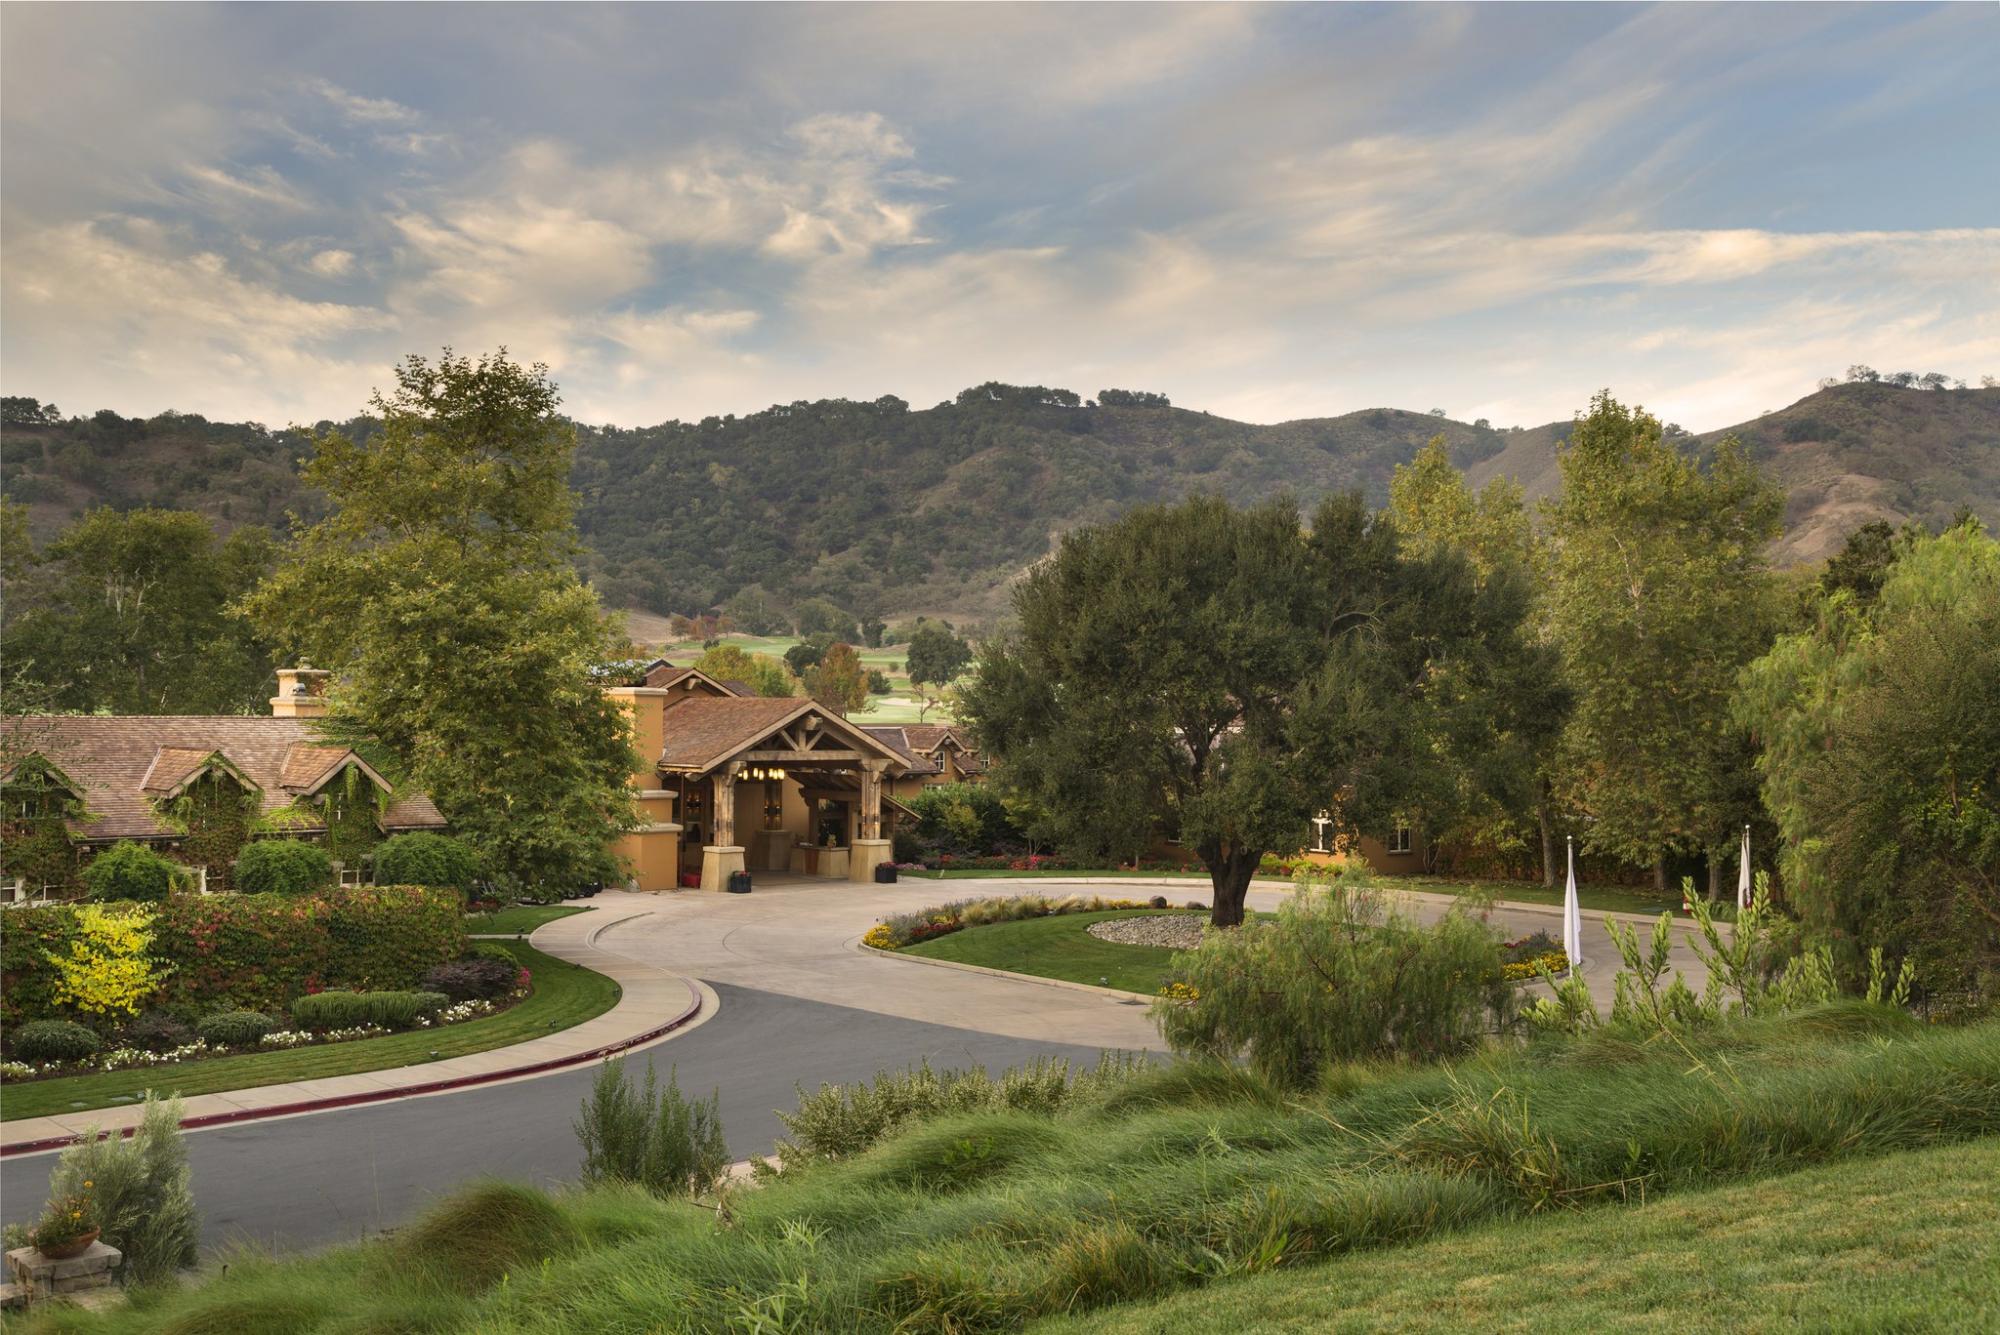 The Rosewood CordeValle's impressive entrance in incredible California.